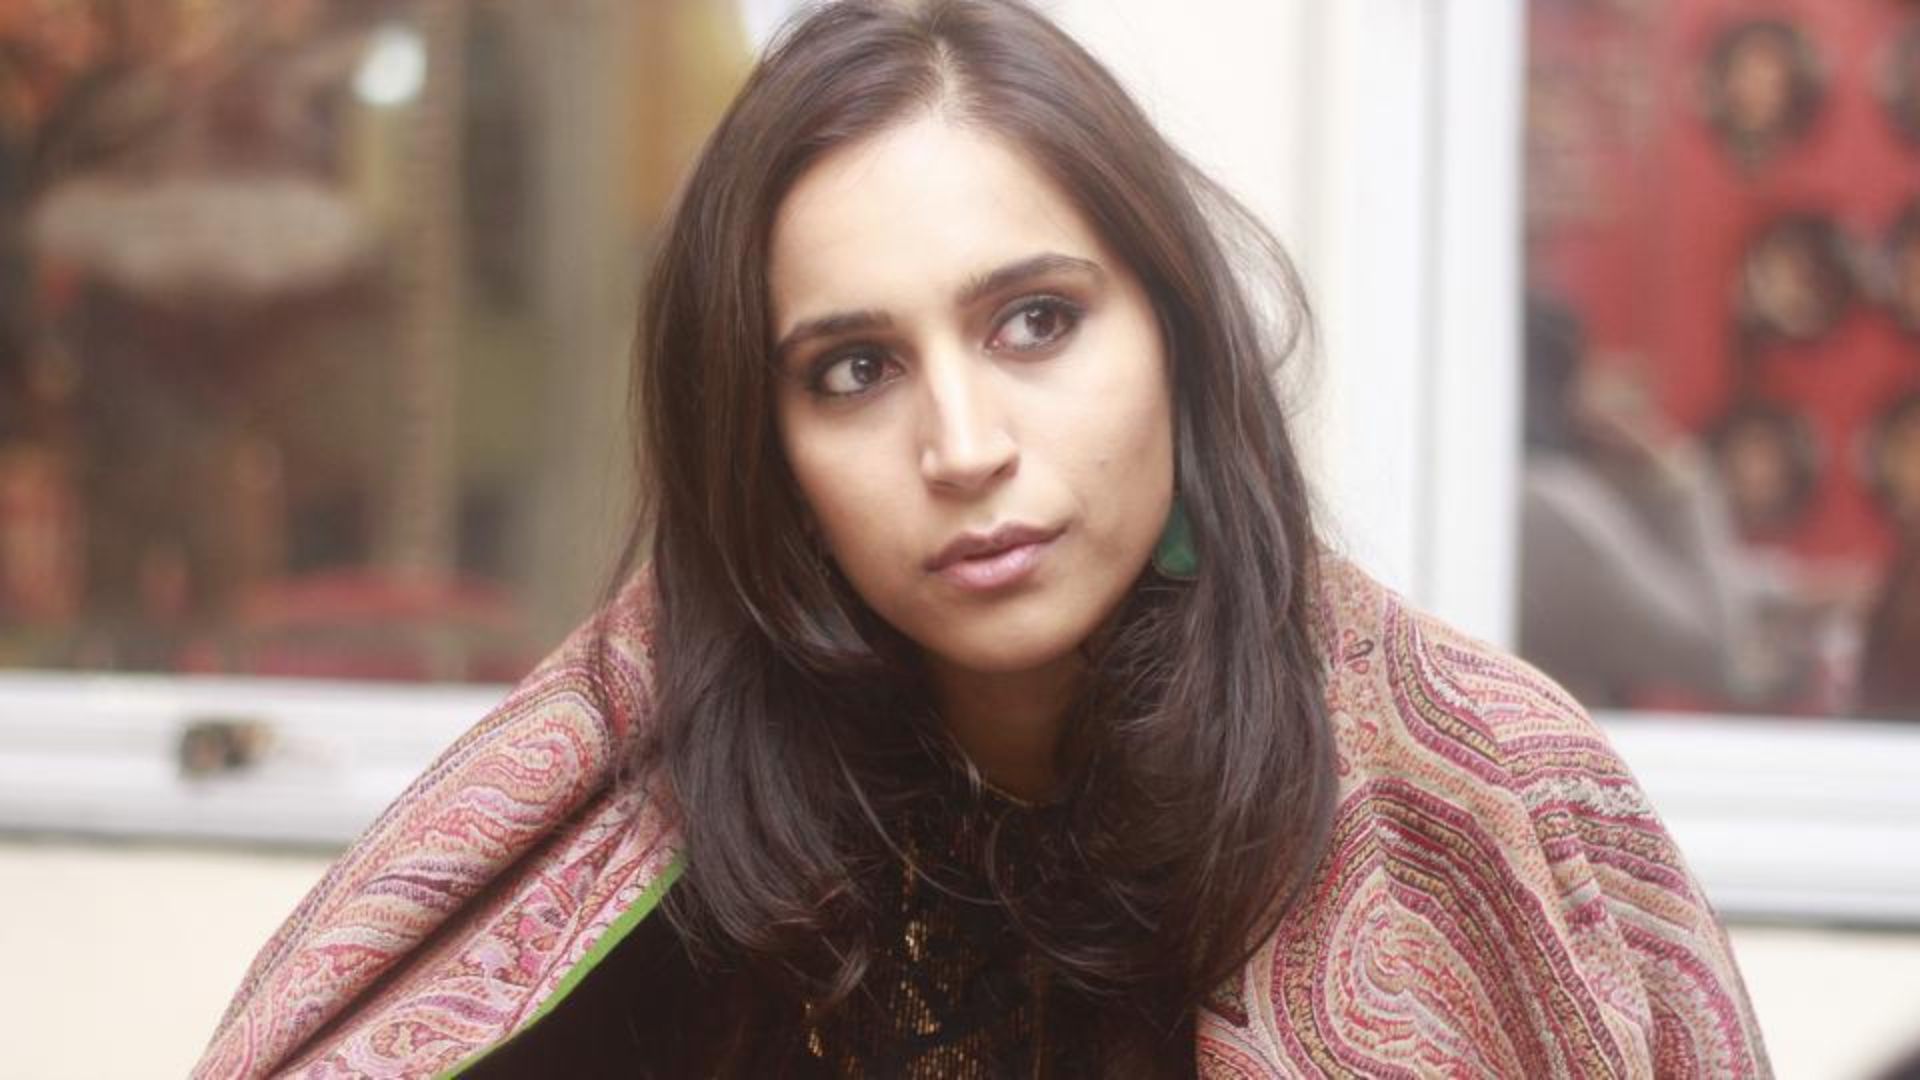 Zoya Hussain - An Indian Actress, Writer And Director Primarily Working In In Hindi Films